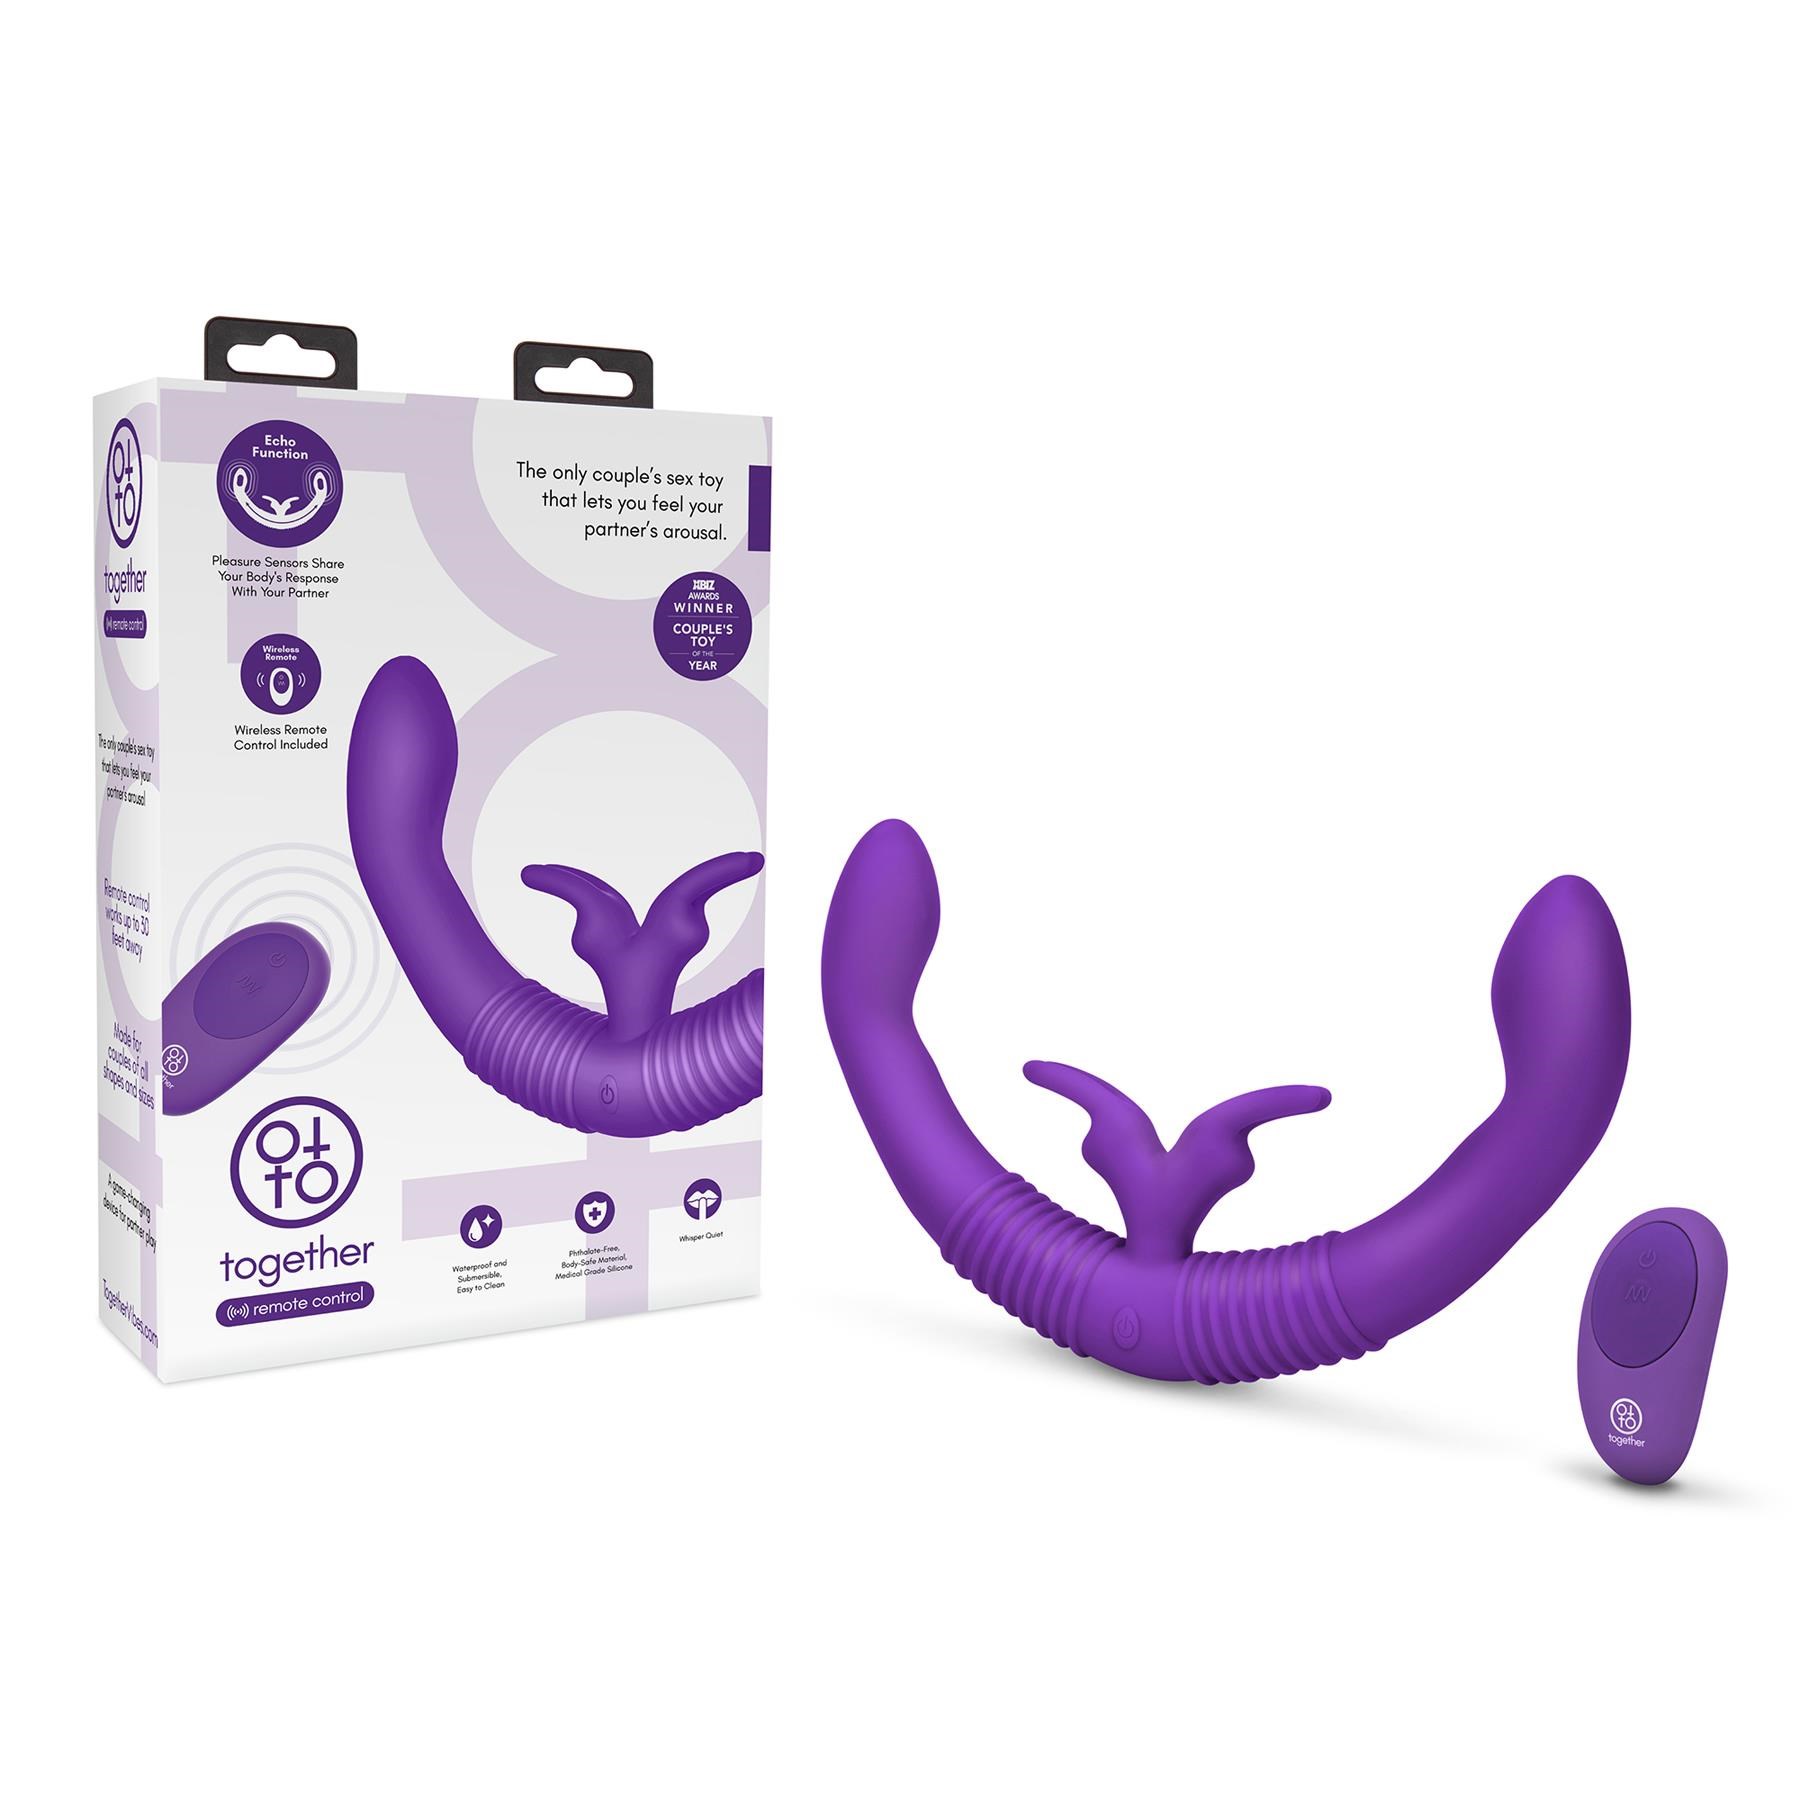 Together Toy Vibrating Double Dildo With Remote Control- Product and Packaging